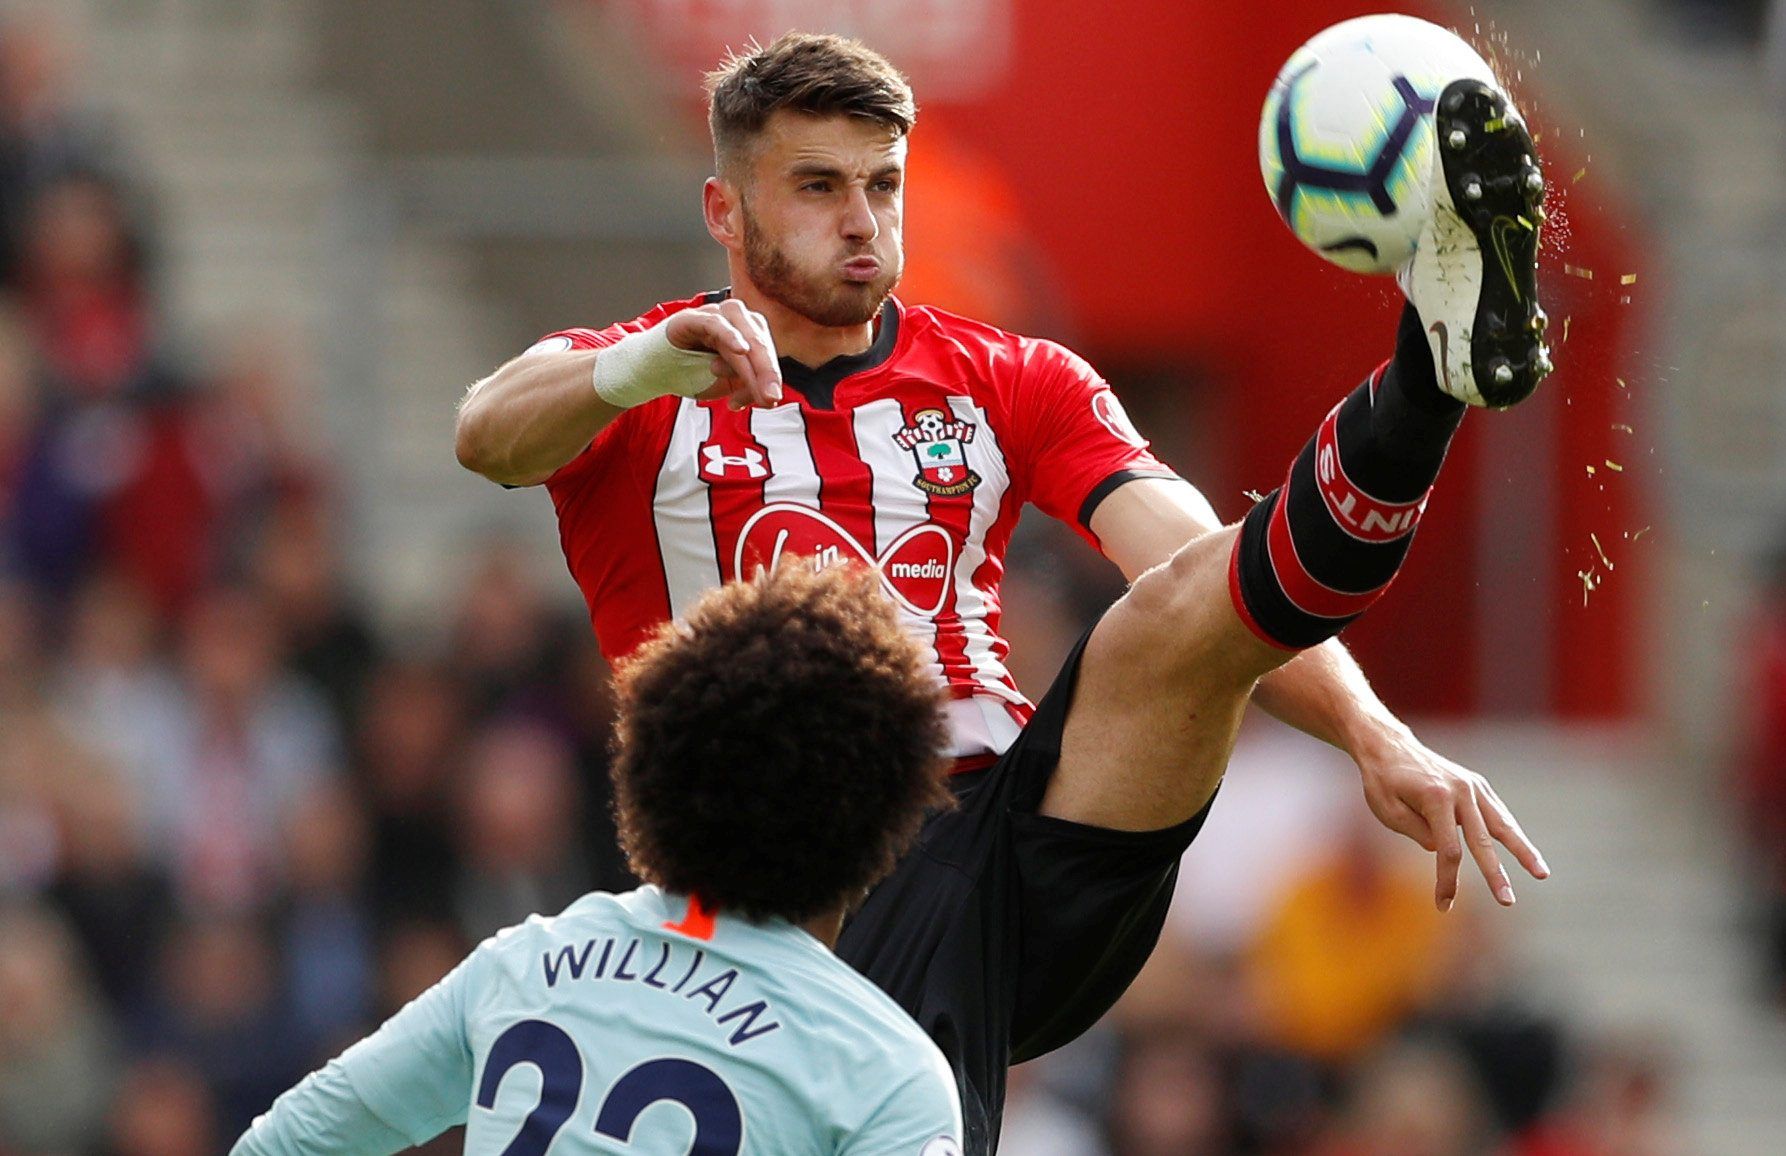 Soccer Football - Premier League - Southampton v Chelsea - St Mary's Stadium, Southampton, Britain - October 7, 2018  Chelsea's Willian in action with Southampton's Wesley Hoedt           Action Images via Reuters/John Sibley  EDITORIAL USE ONLY. No use with unauthorized audio, video, data, fixture lists, club/league logos or 